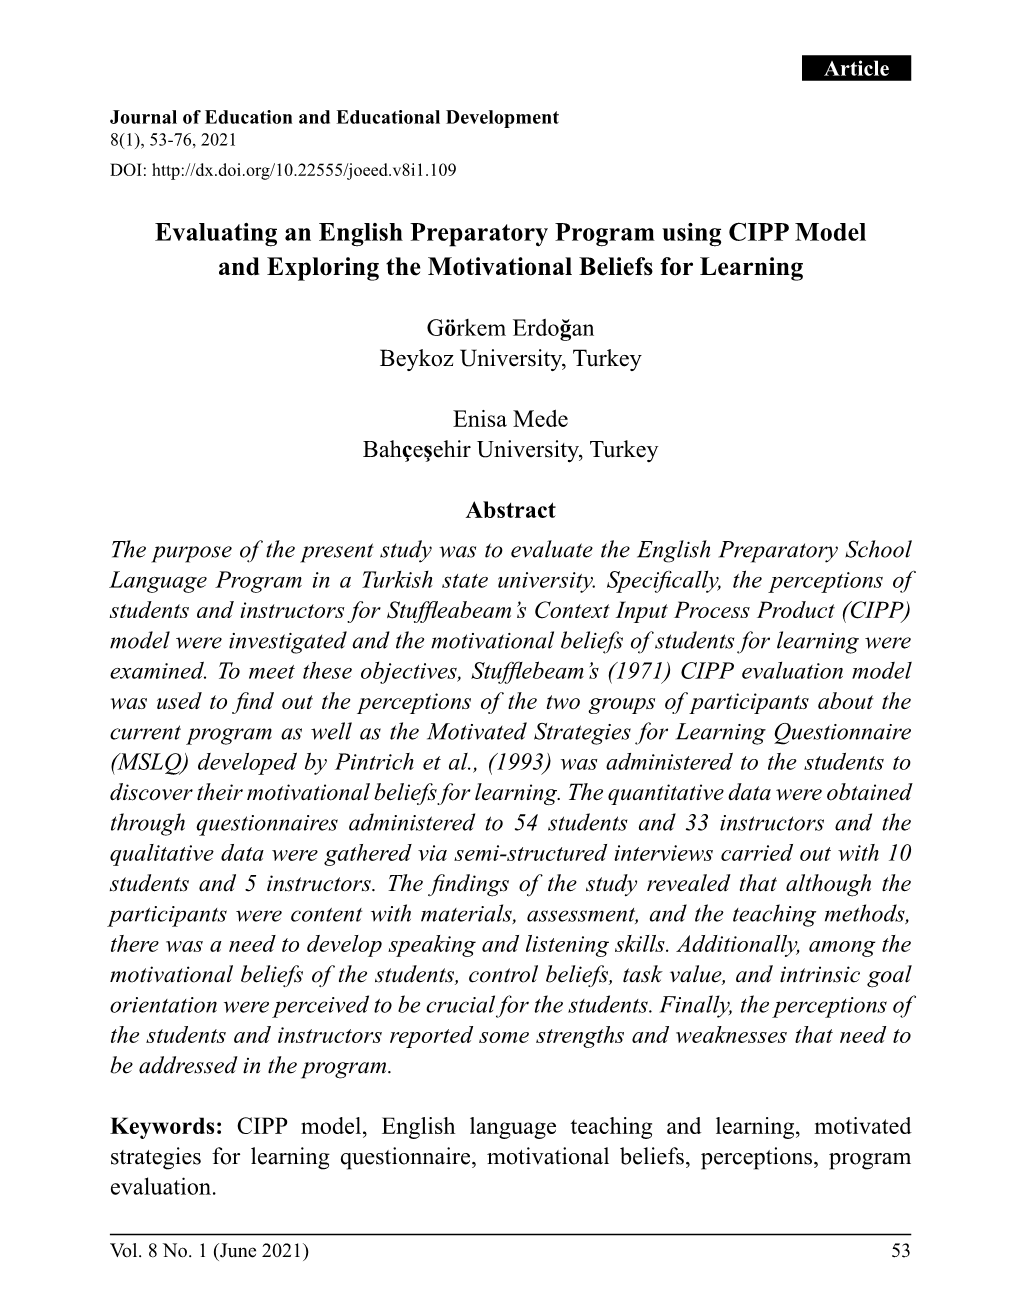 Evaluating an English Preparatory Program Using CIPP Model and Exploring the Motivational Beliefs for Learning